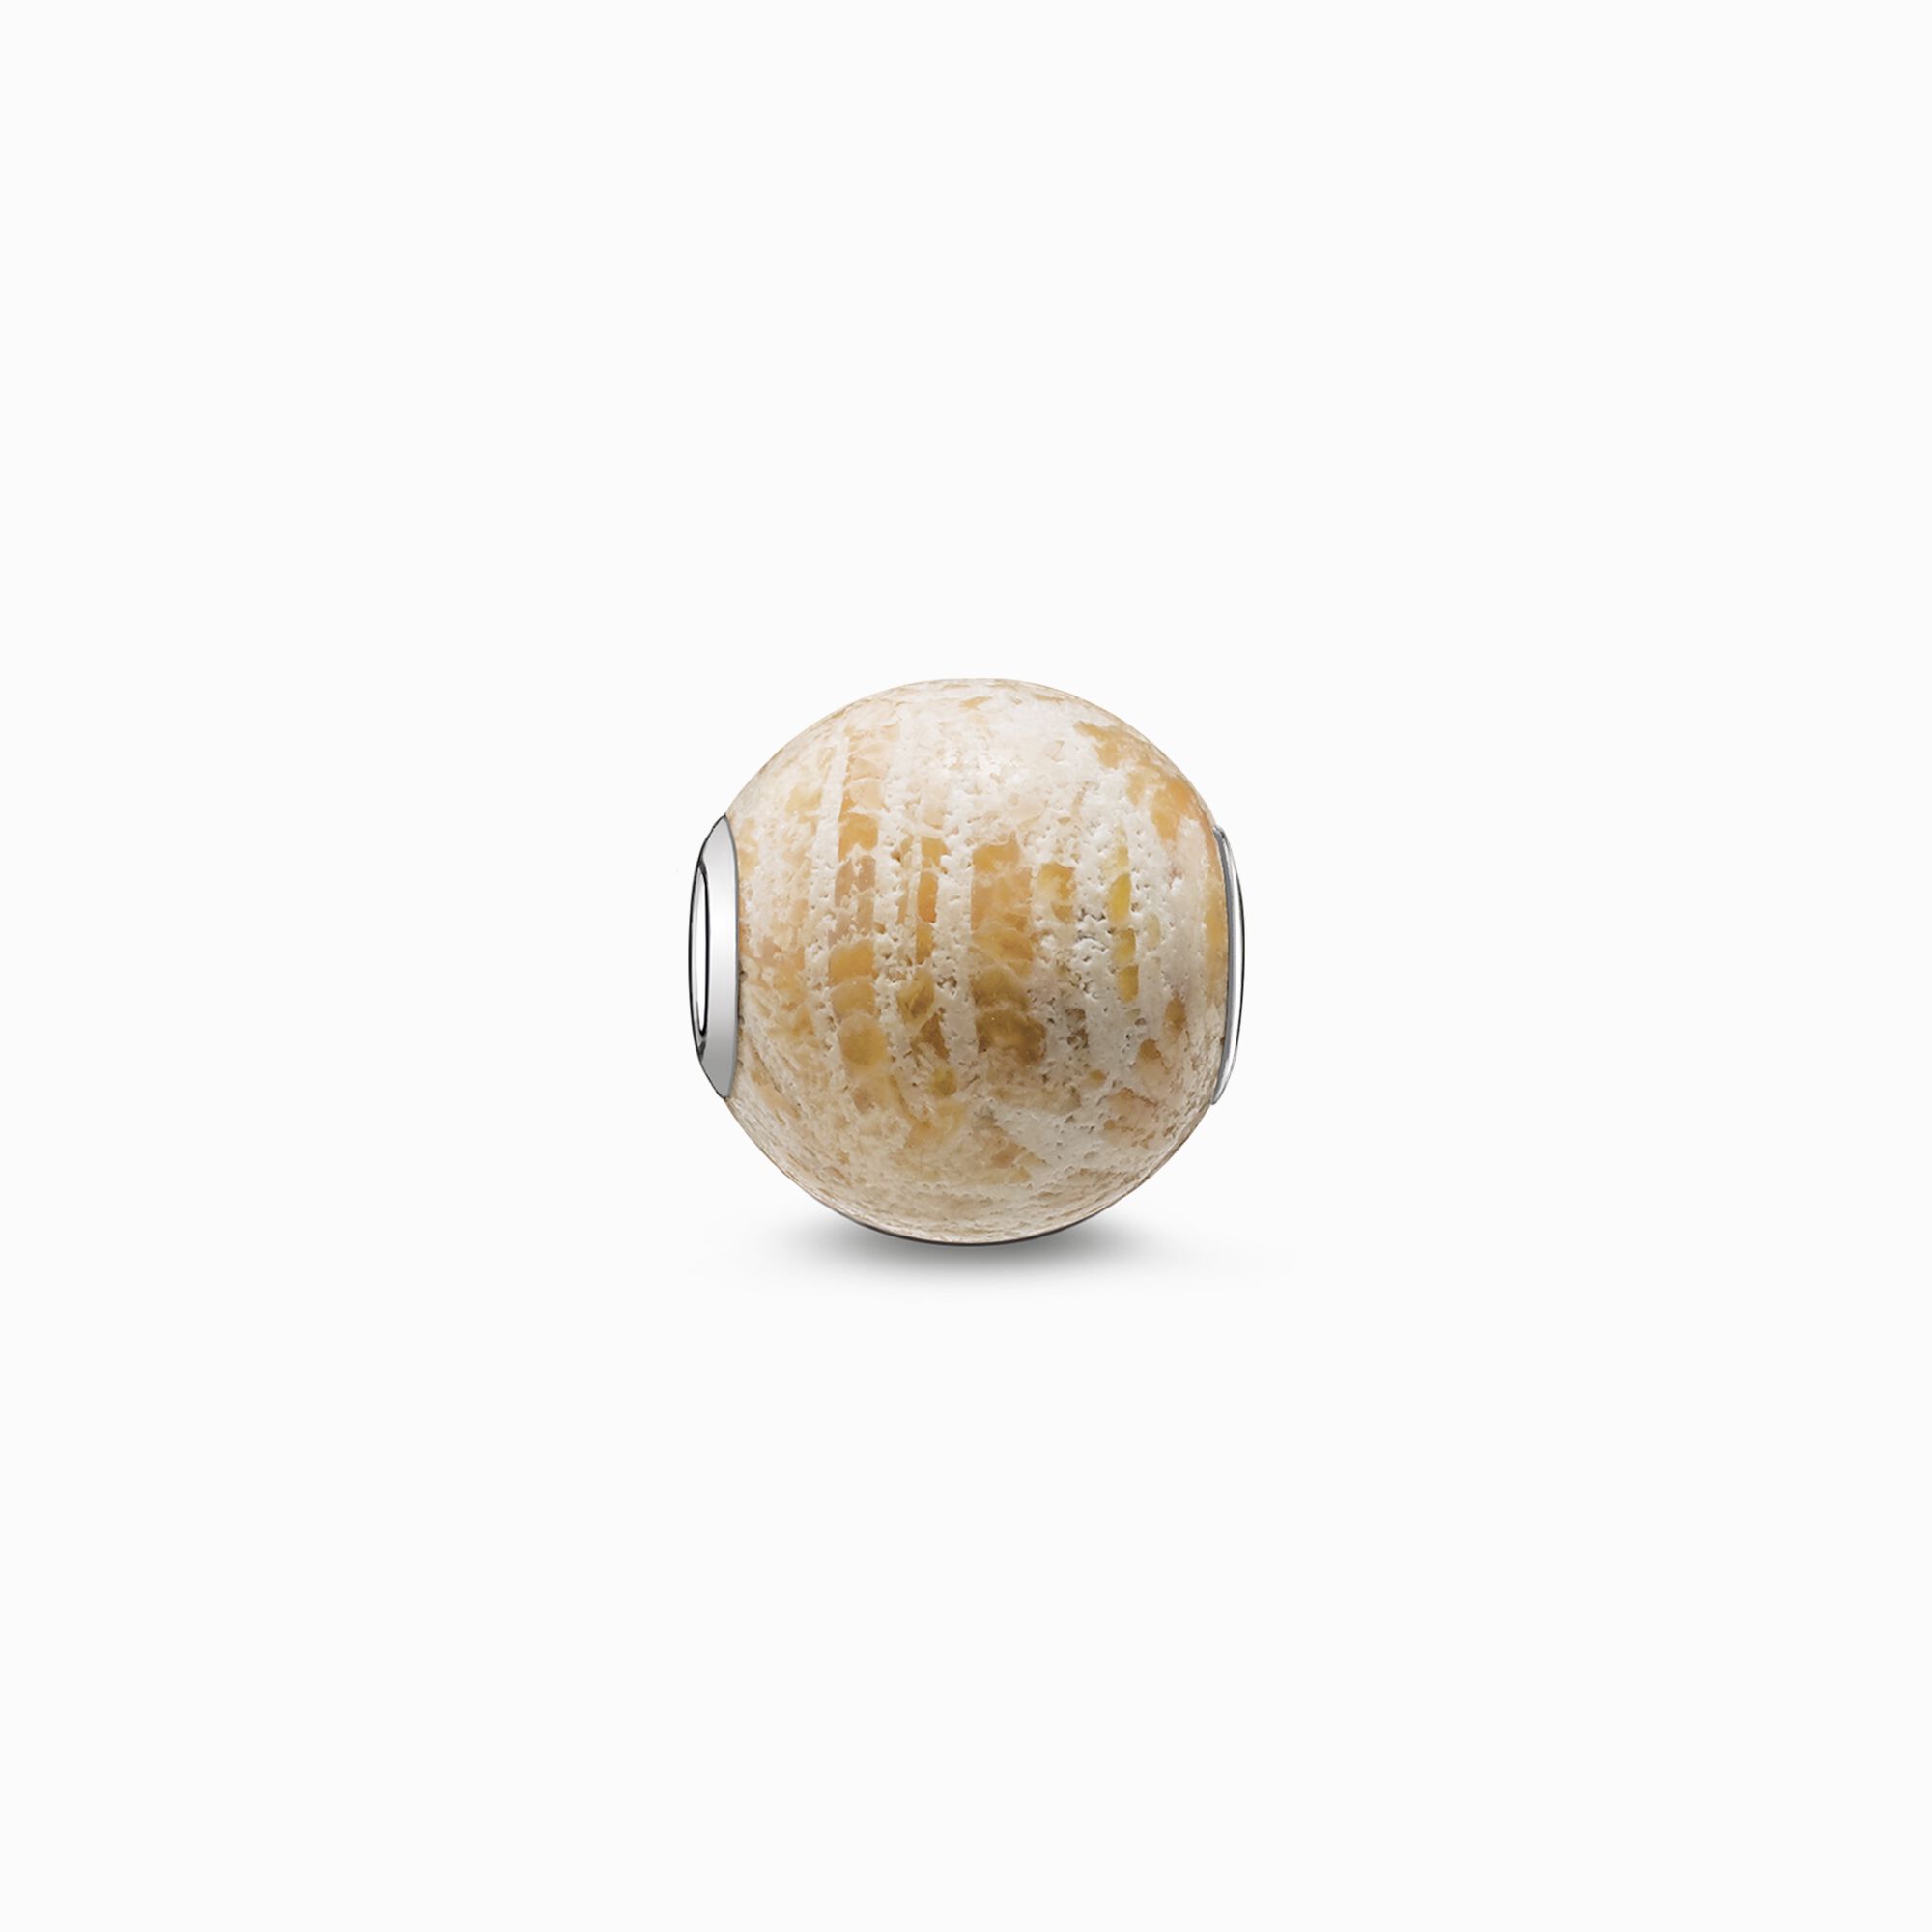 Bead daisy jasper from the Karma Beads collection in the THOMAS SABO online store